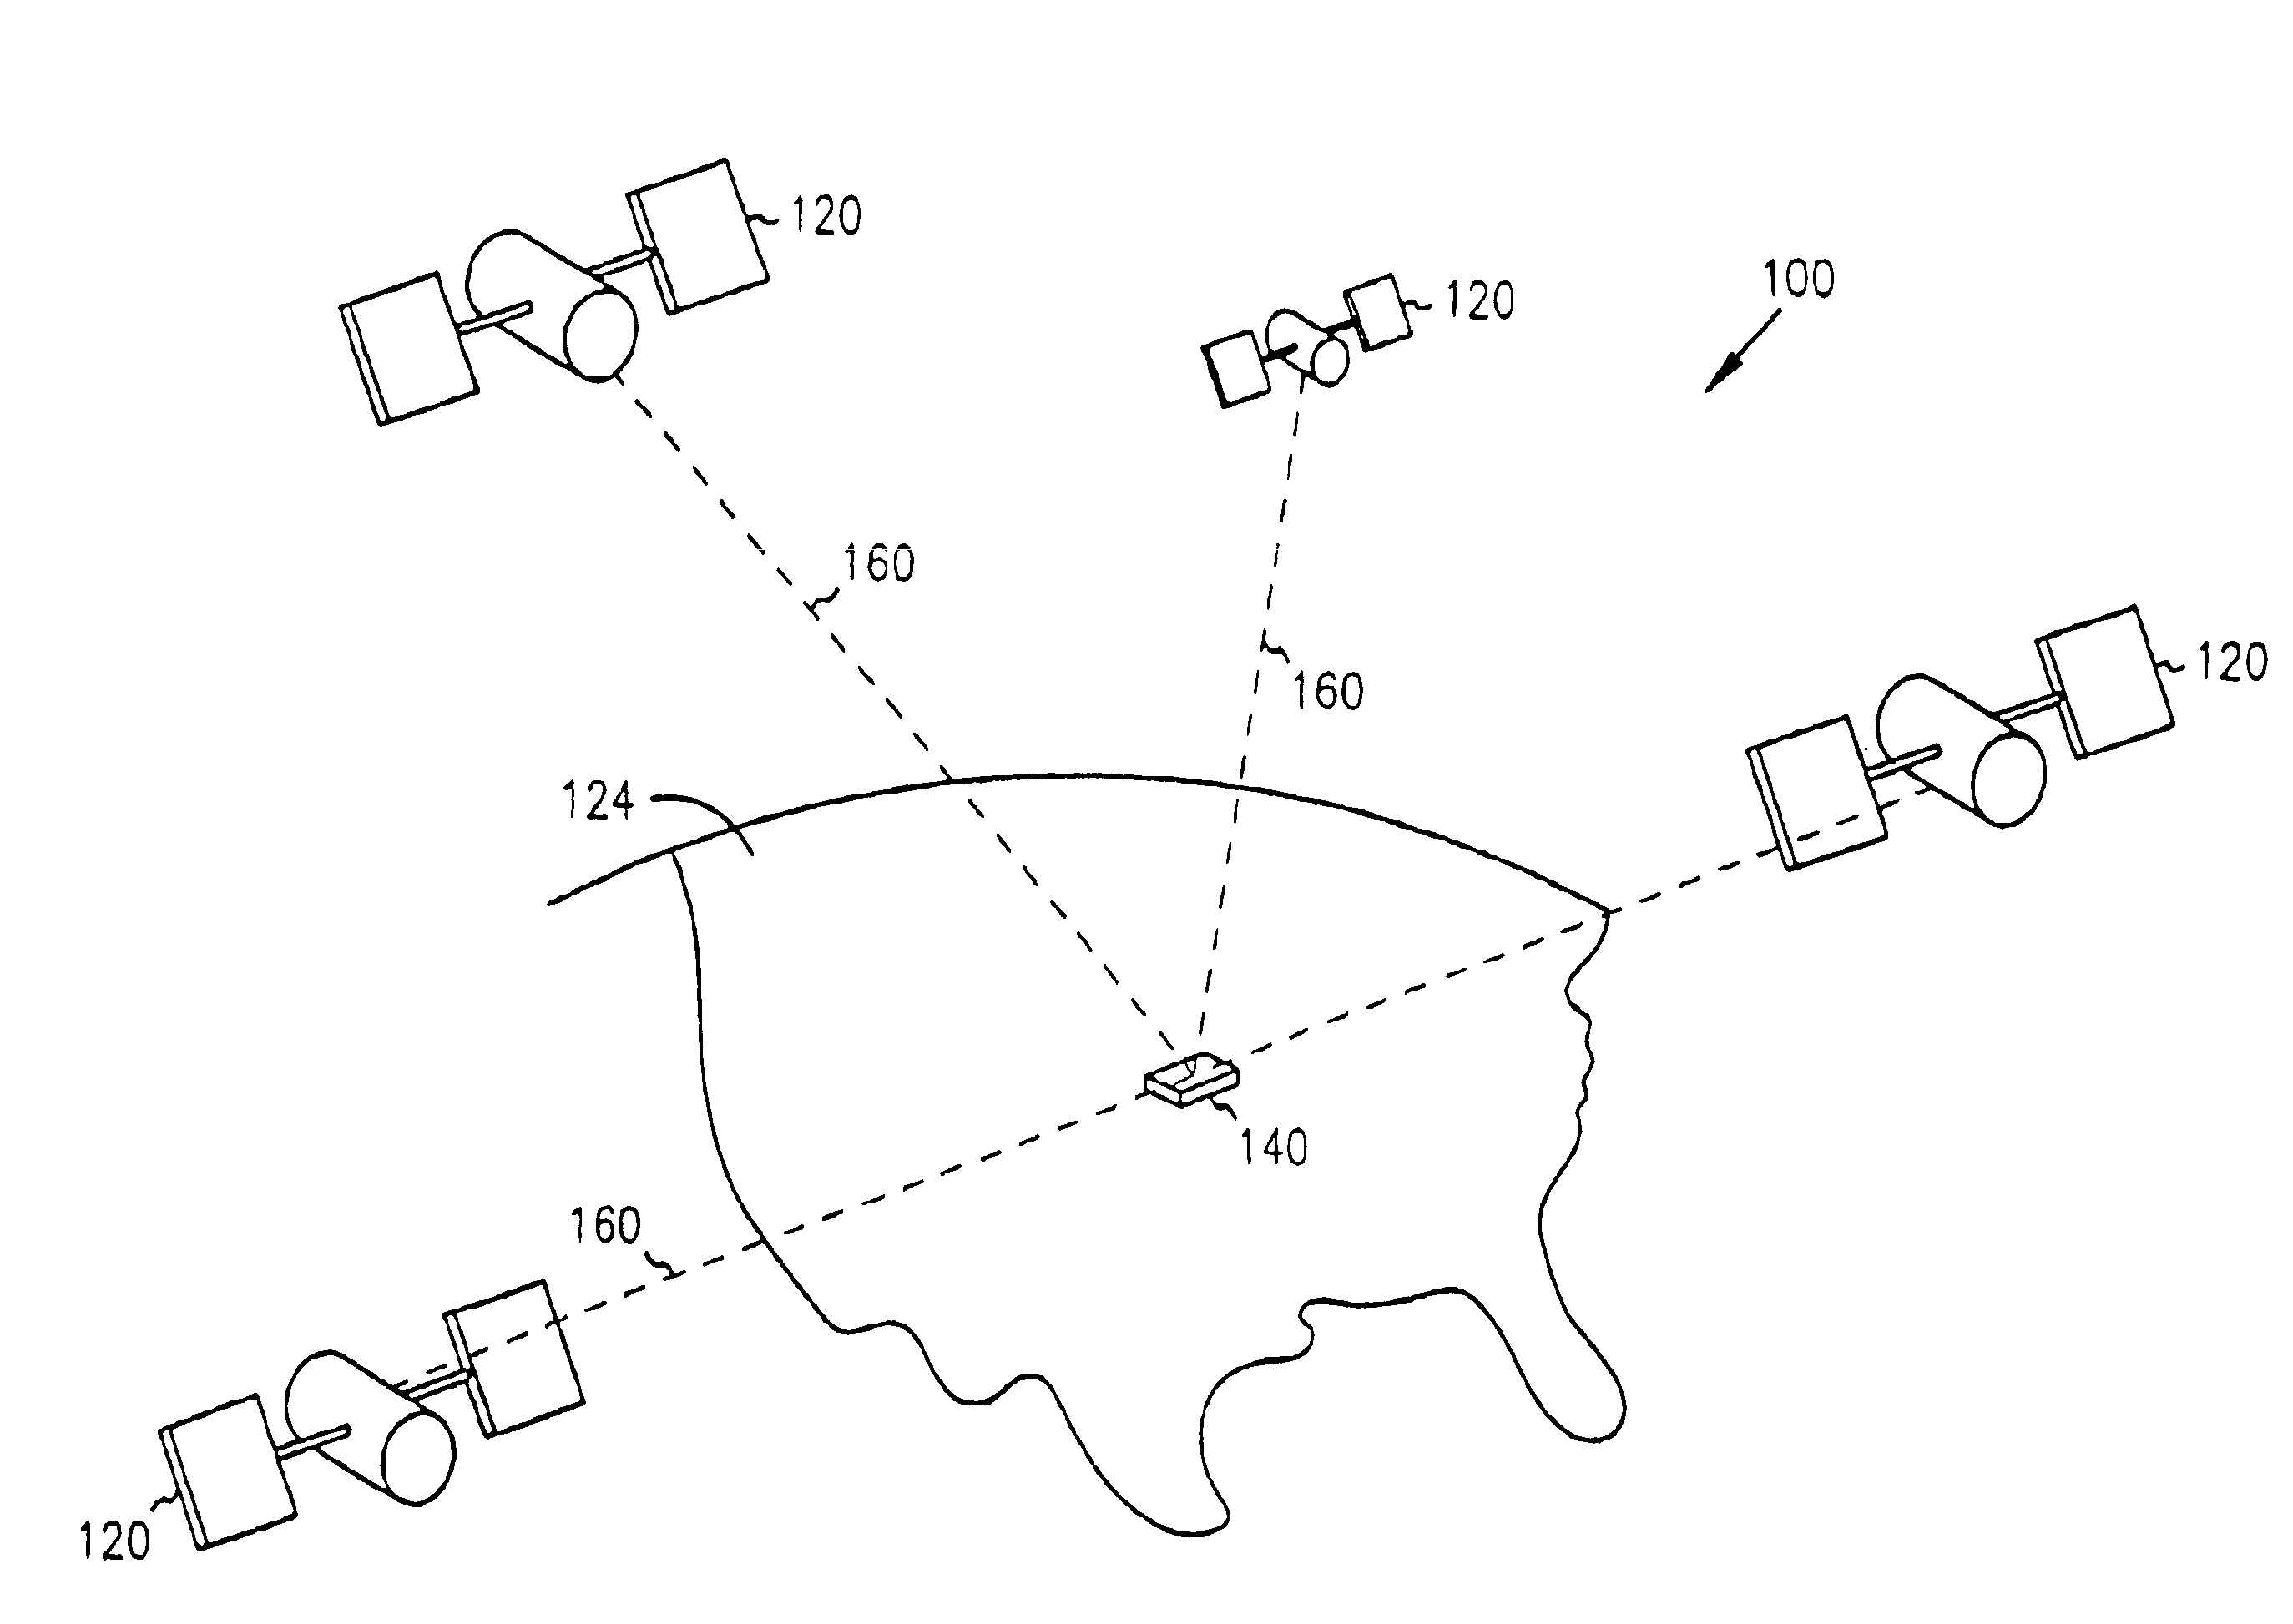 Systems and methods for a navigational device with forced layer switching based on memory constraints